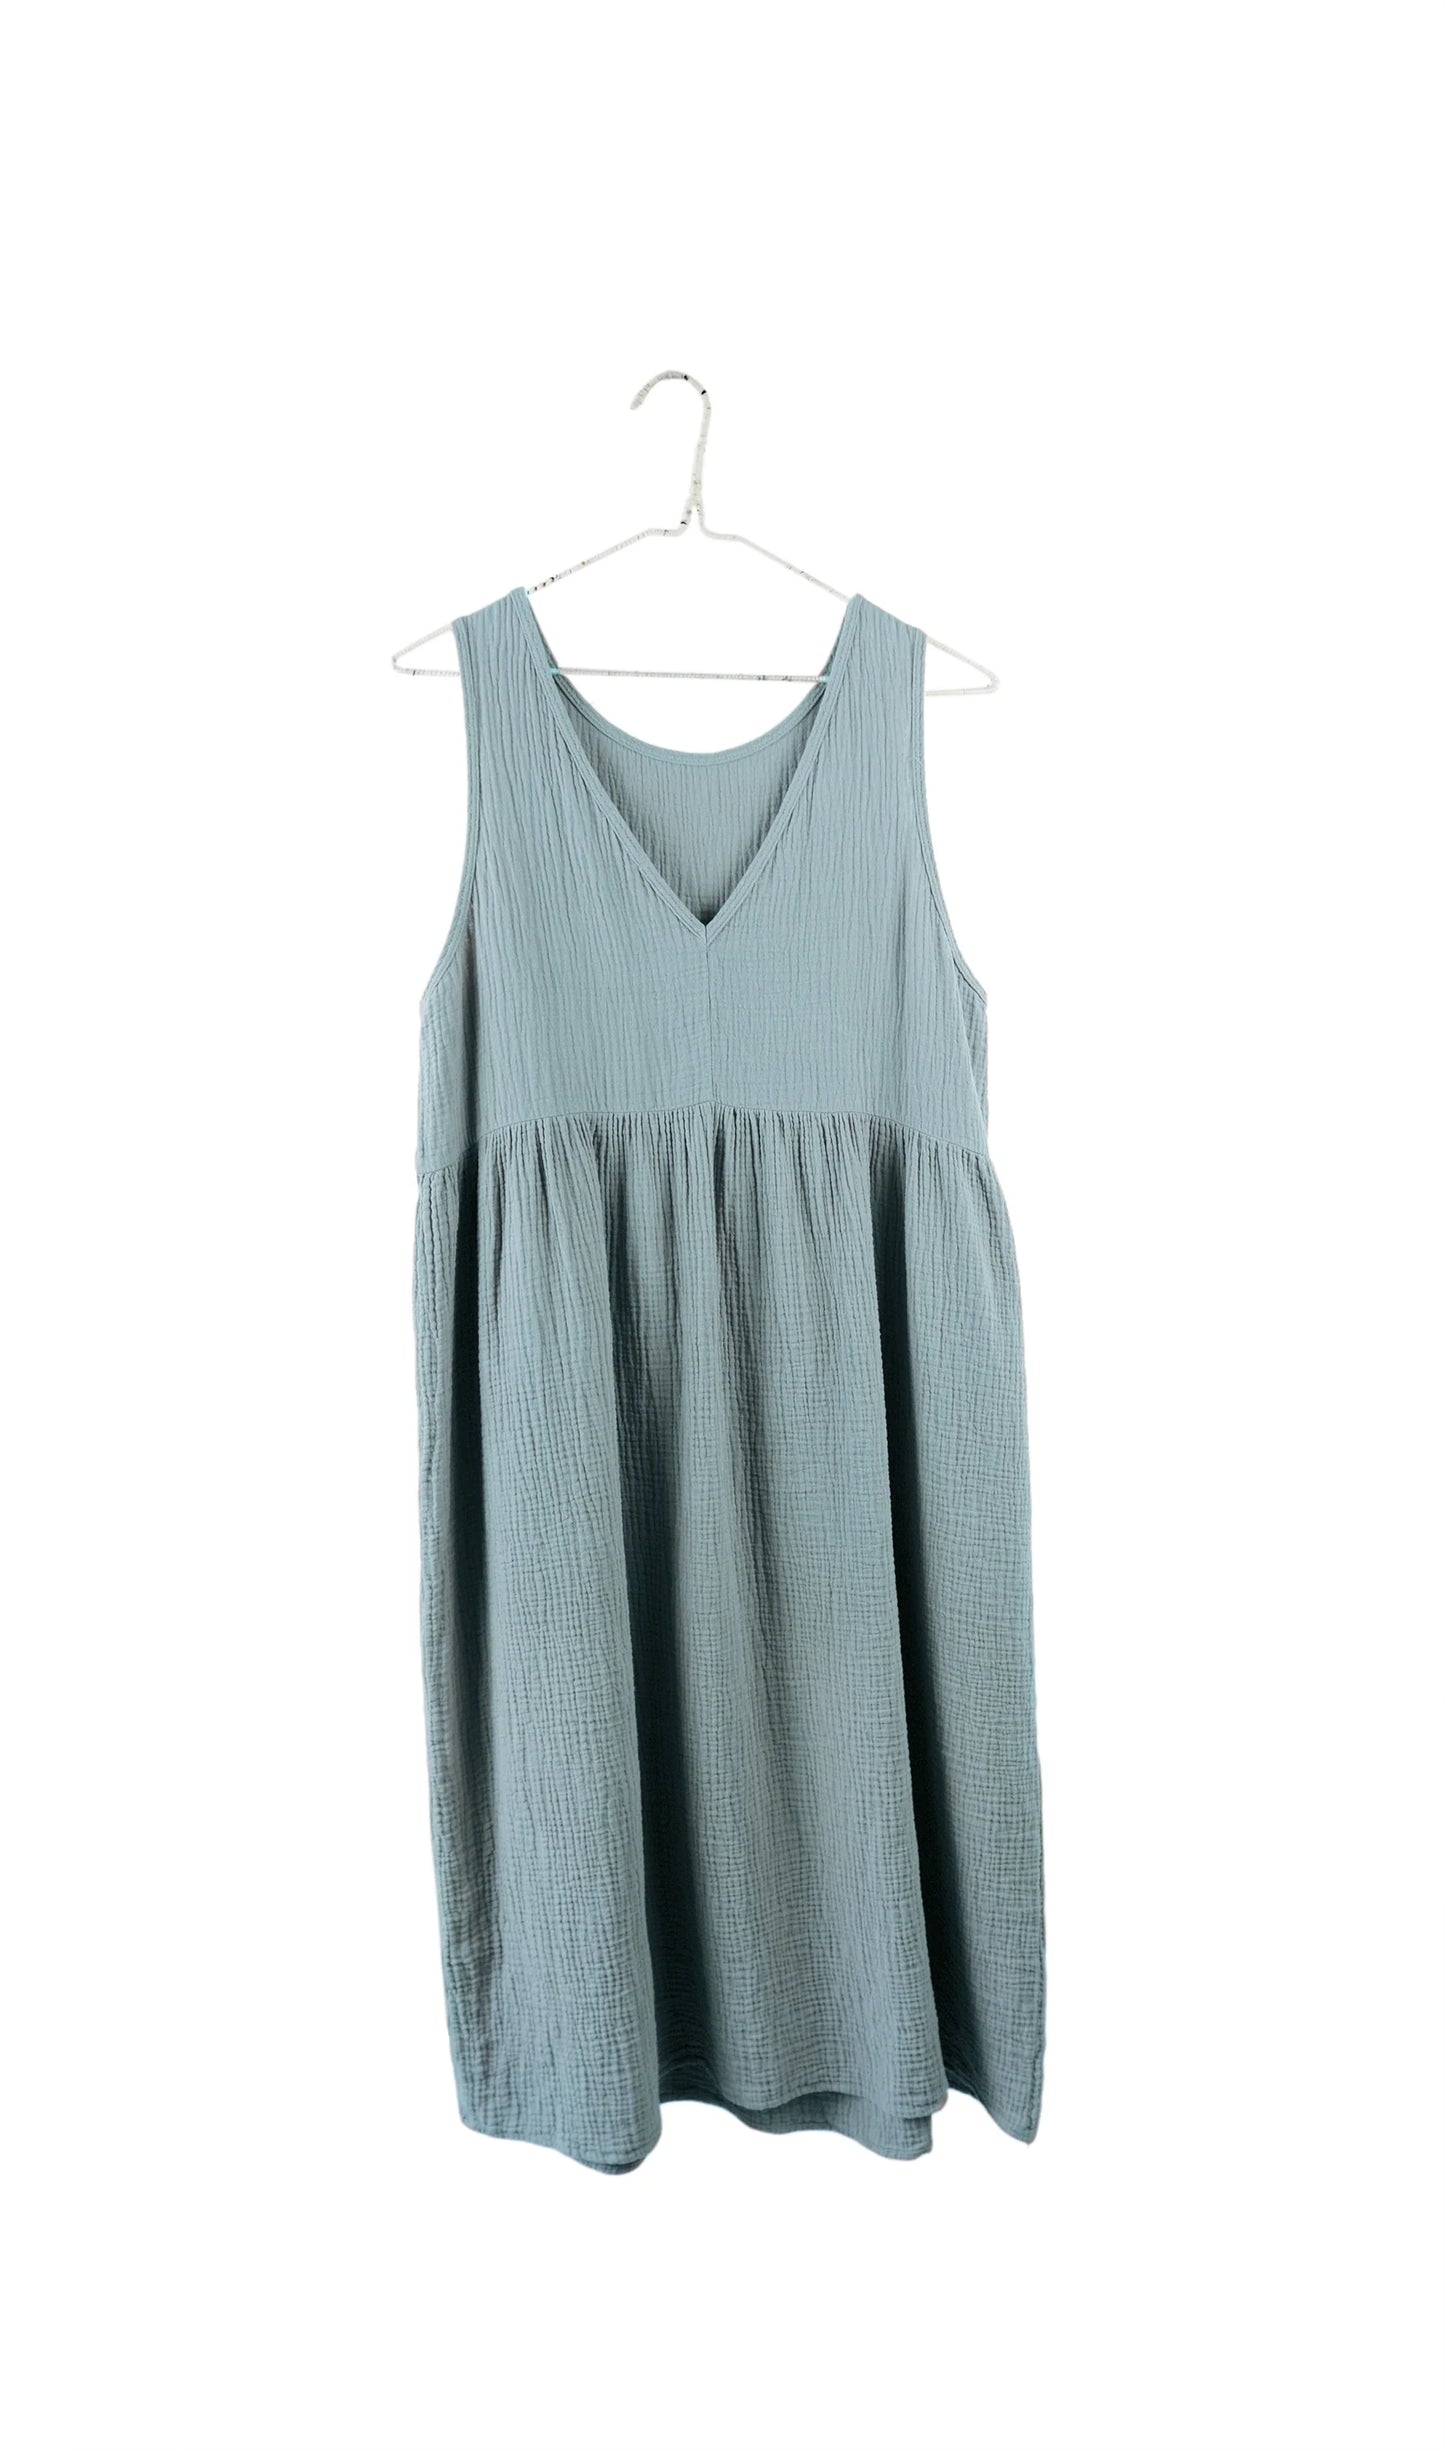 It Is Well LA - Elevated Ethical Basics Made in USA - Reversible Organic Cotton Gauze Midi Dress on Hanger - Misty Sage